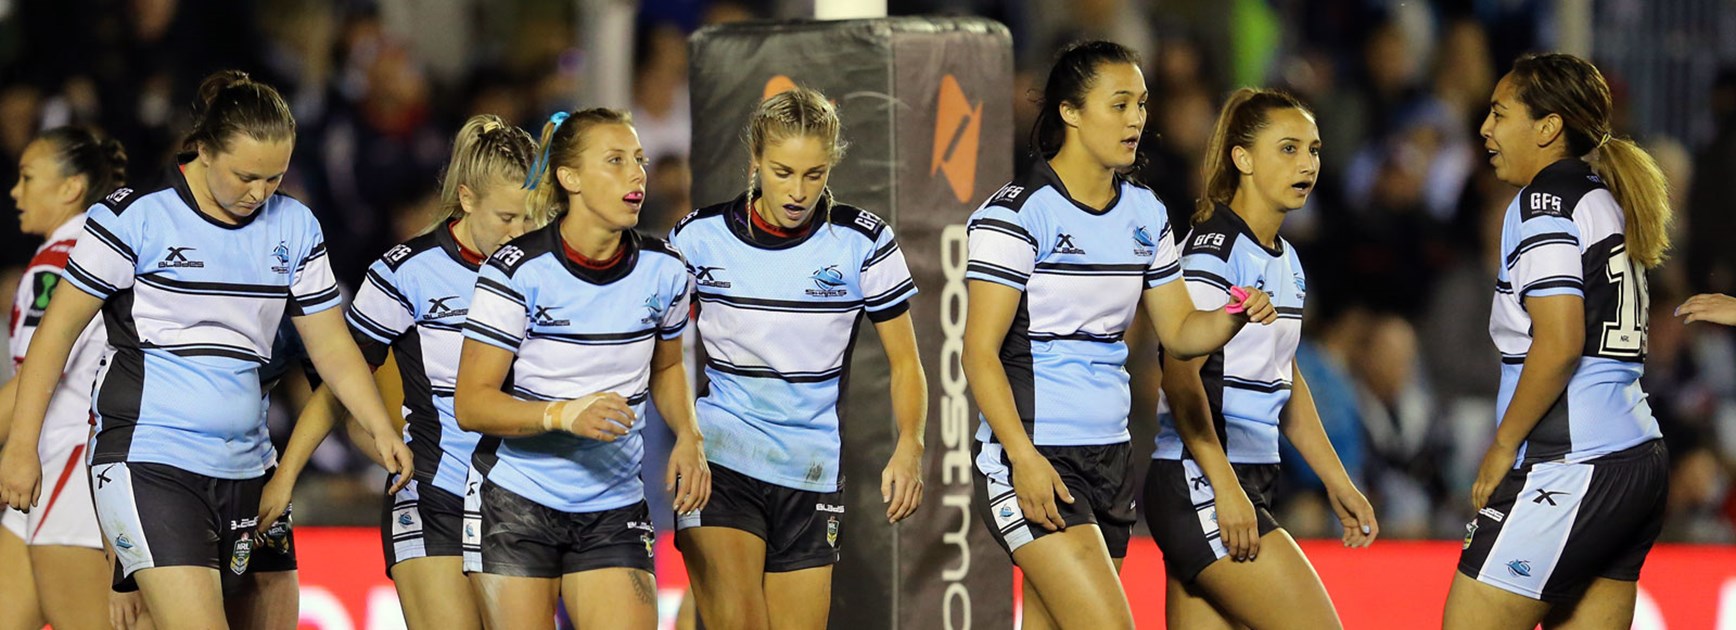 The Sharks clinched the inaugural women's Nines match played against the Dragons.